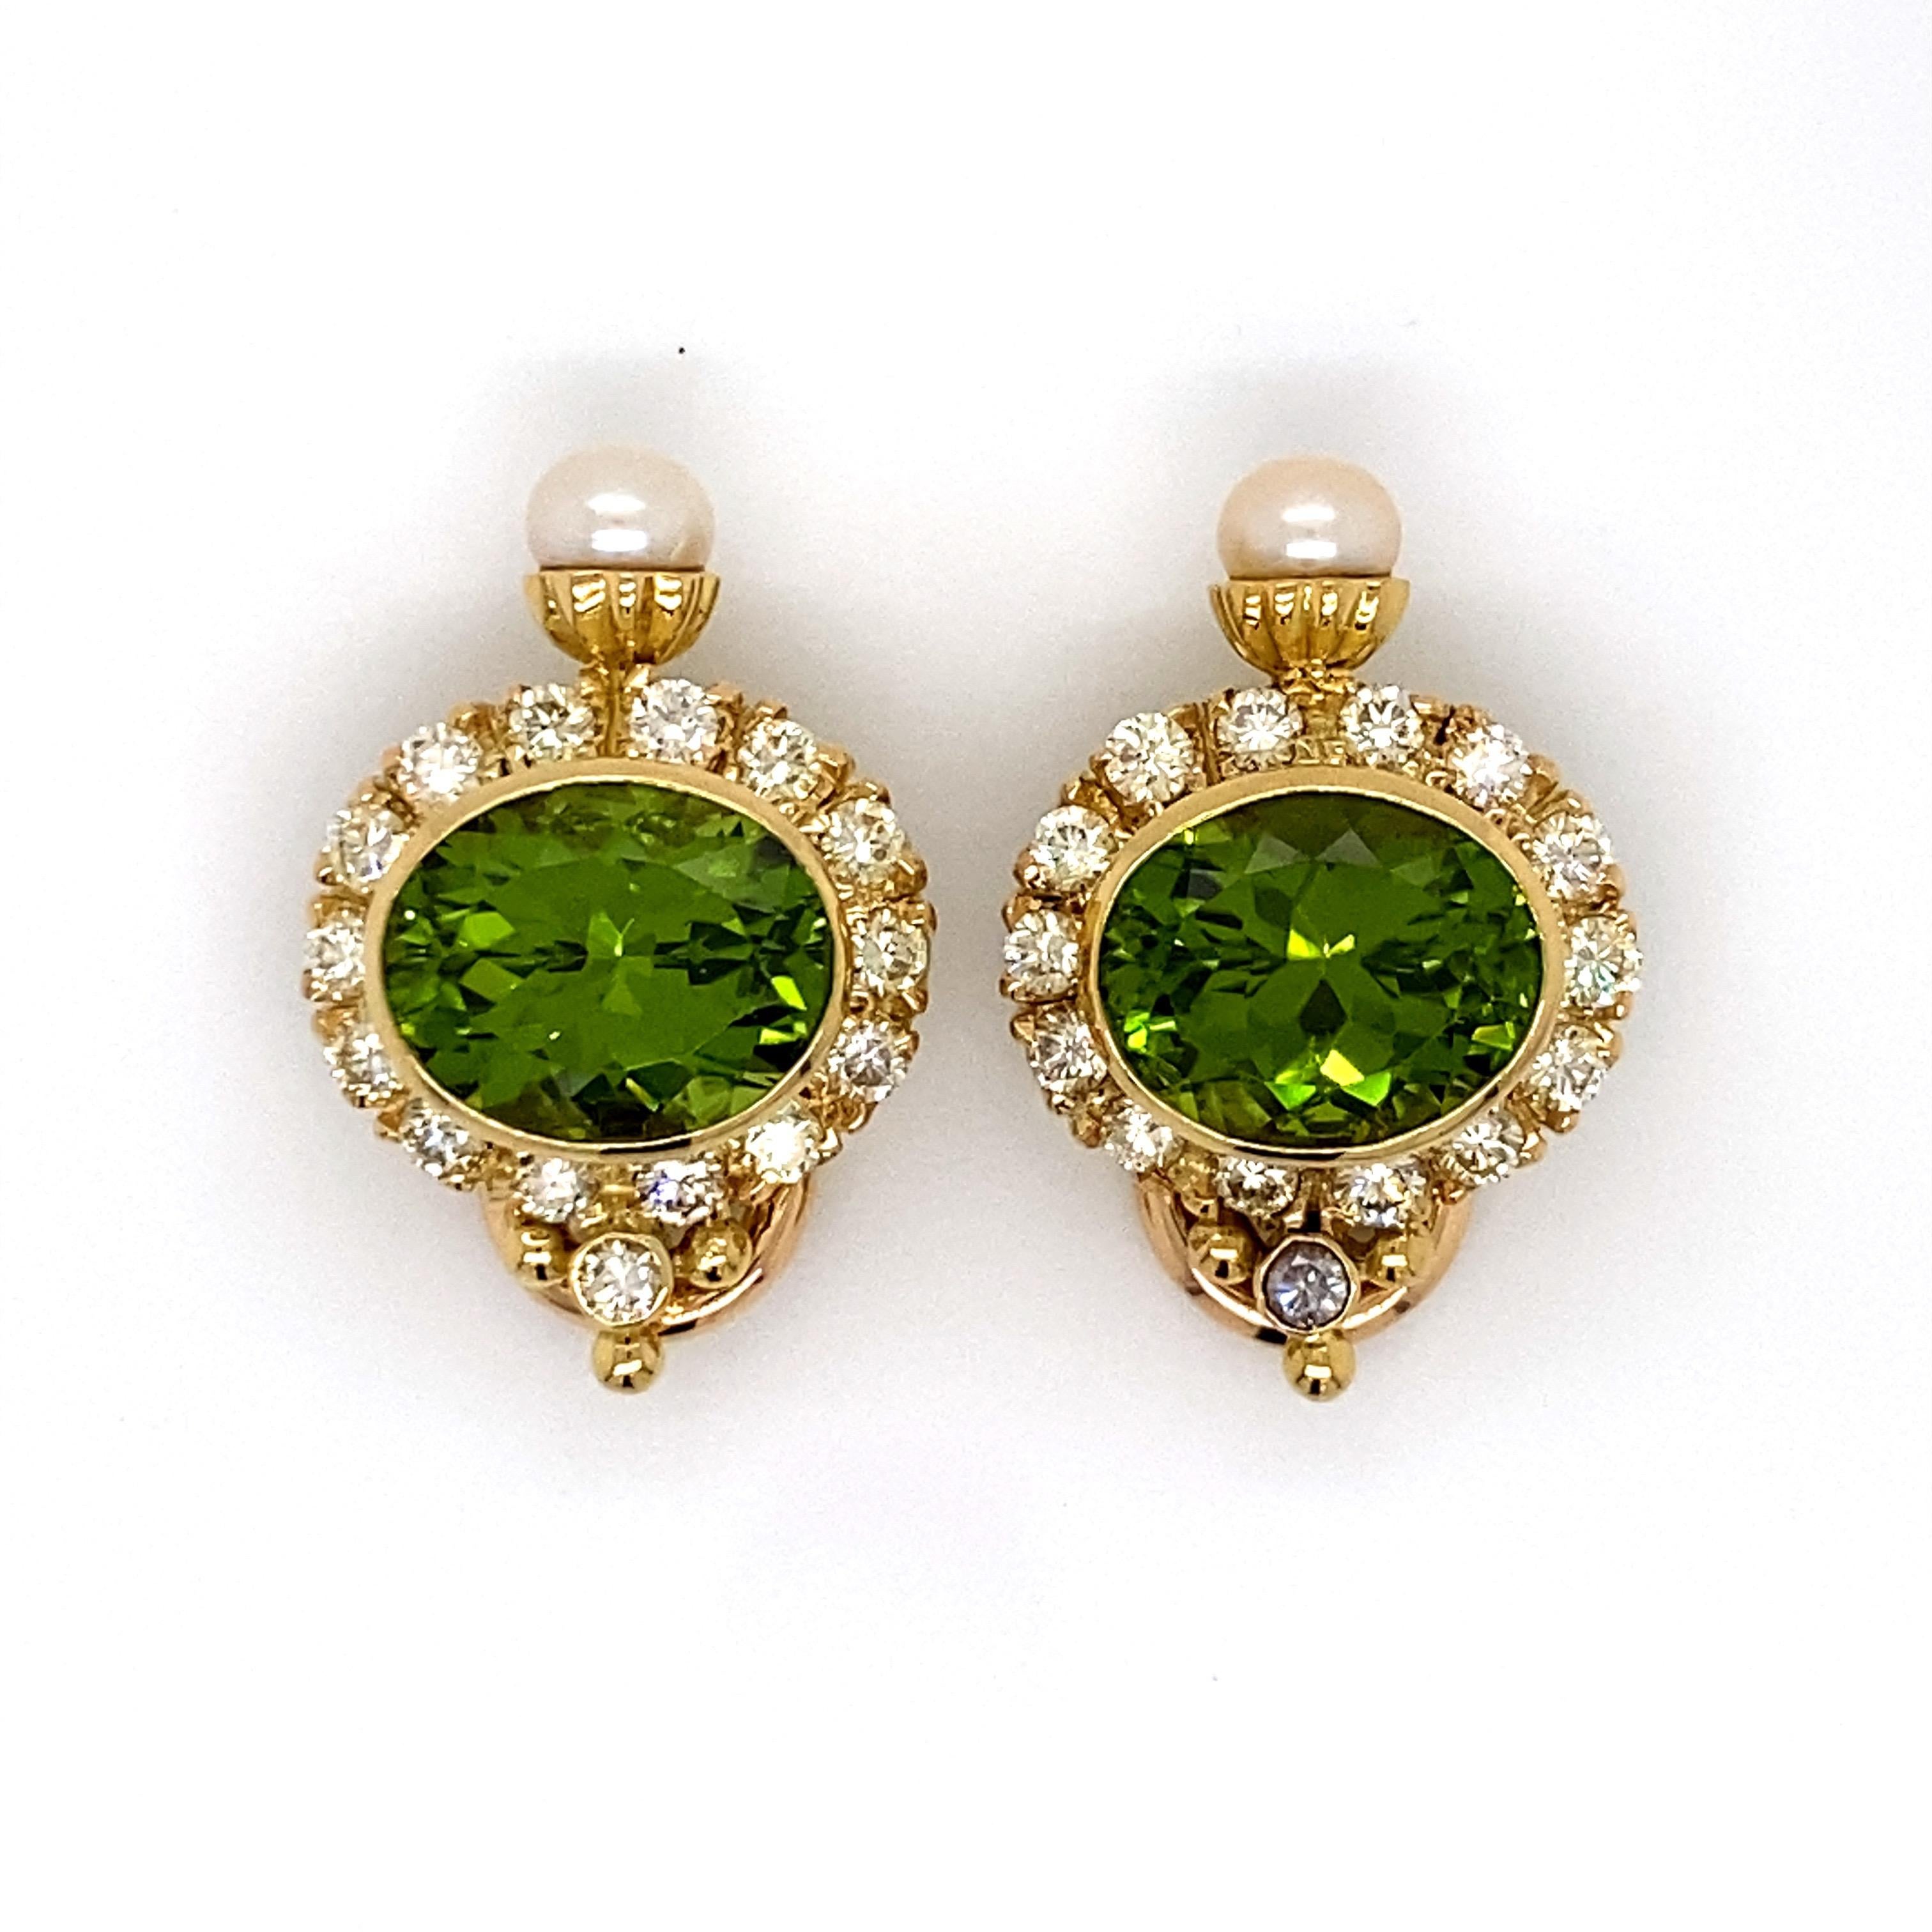 These exquisite vintage clip earrings are a true testament to exceptional craftsmanship and impeccable taste. Meticulously crafted in luxurious 18k yellow gold, they feature two stunning peridot gemstones as the breathtaking centerpieces. The